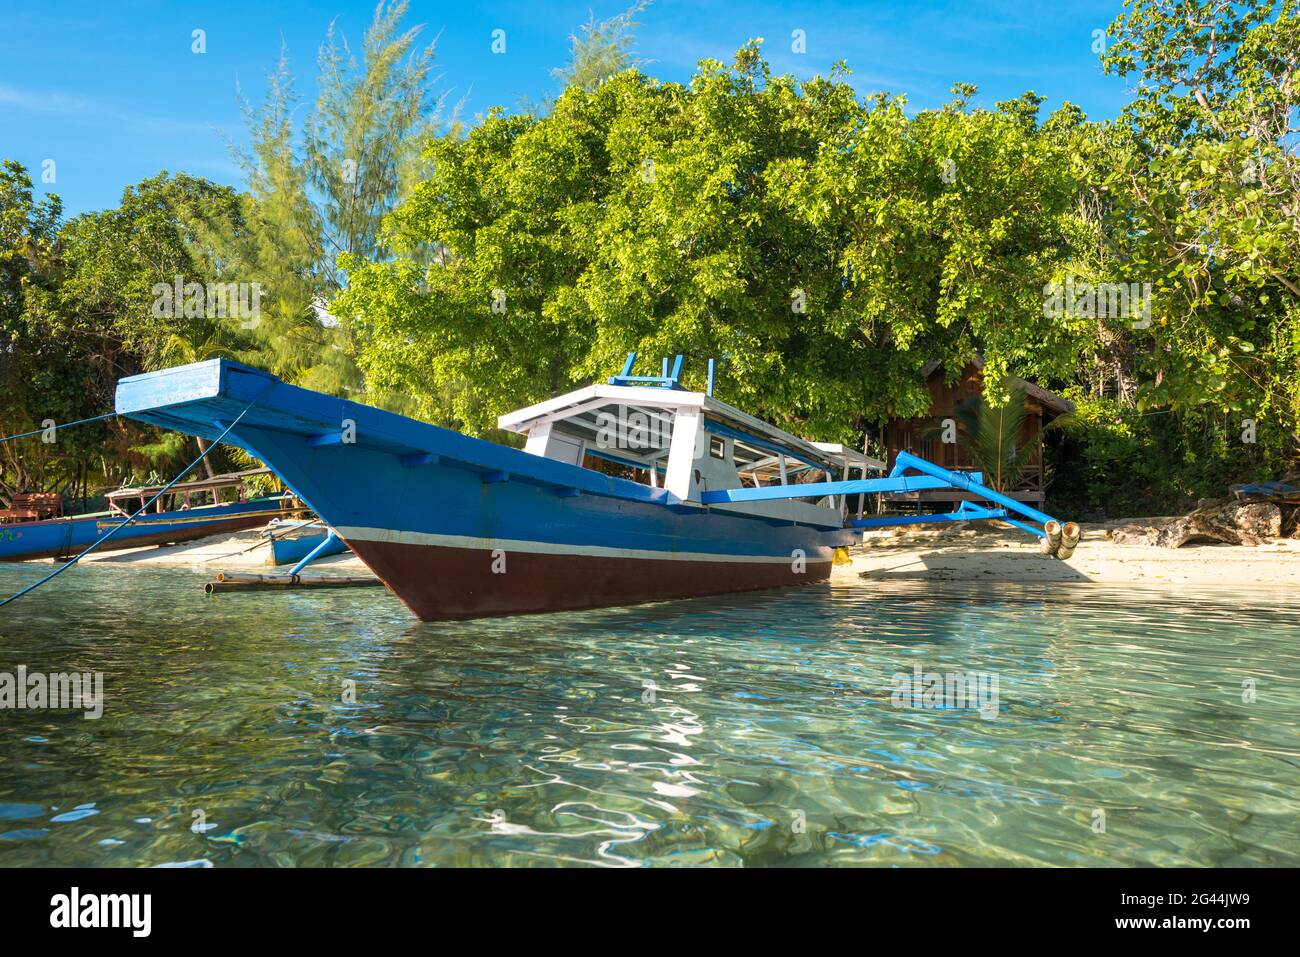 Boats on the beach of the small island of Poyalisa which is part of the Togian archipelago, Sulawesi Stock Photo